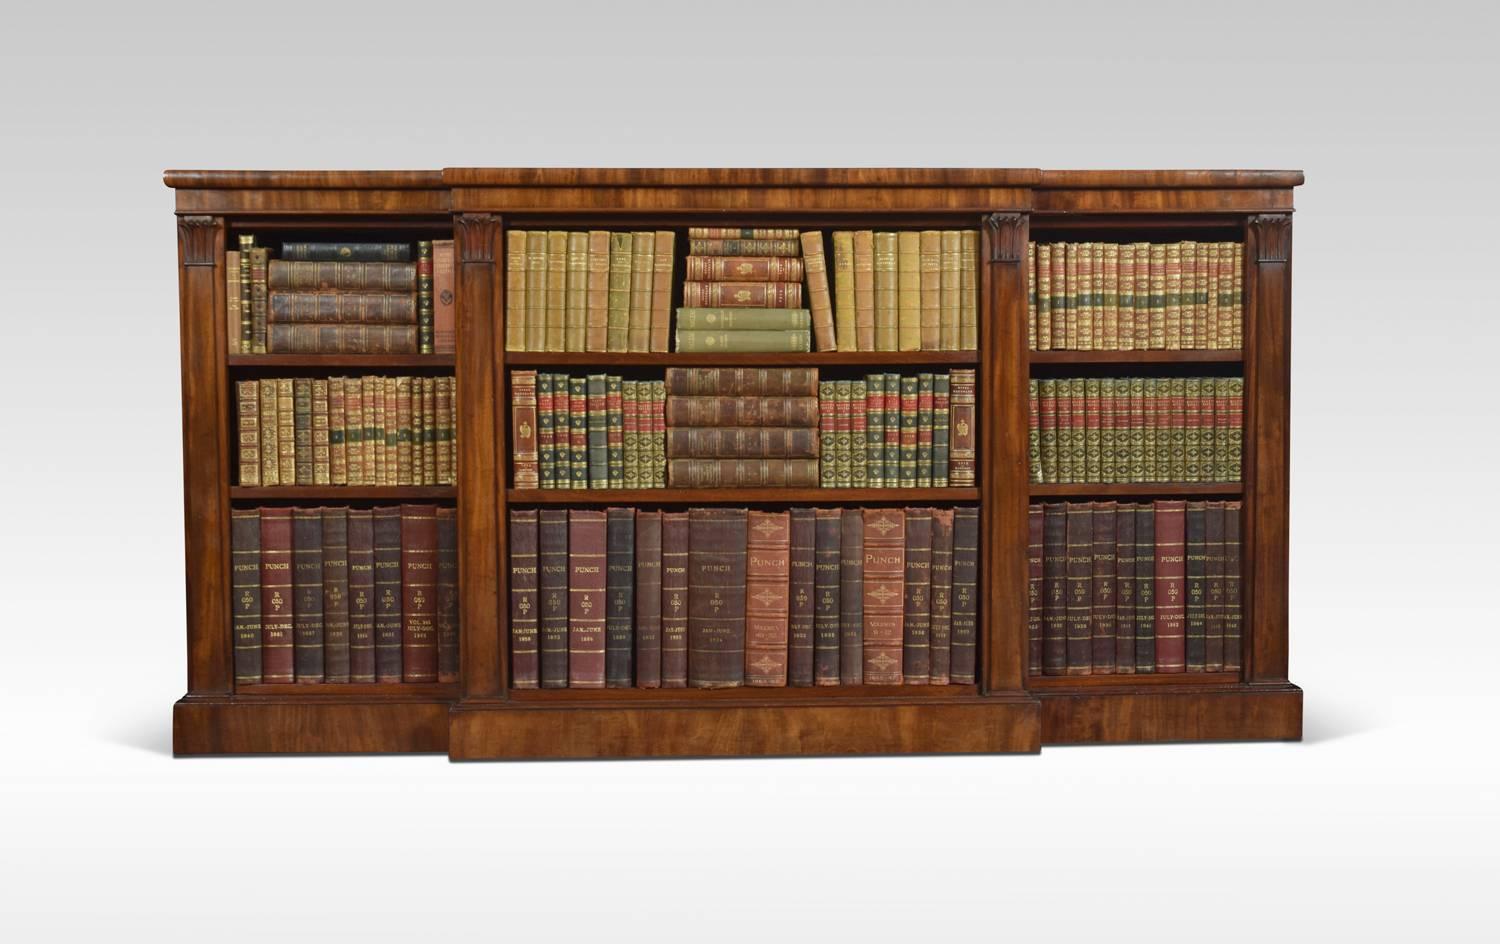 William IV open bookcase, the rectangular breakfront top above three bays of adjustable shelves, divided by carved column pilasters raised up on plinth base.

Dimensions
Height 36.5 inches
Width 72 inches
Depth 17.5 inches.